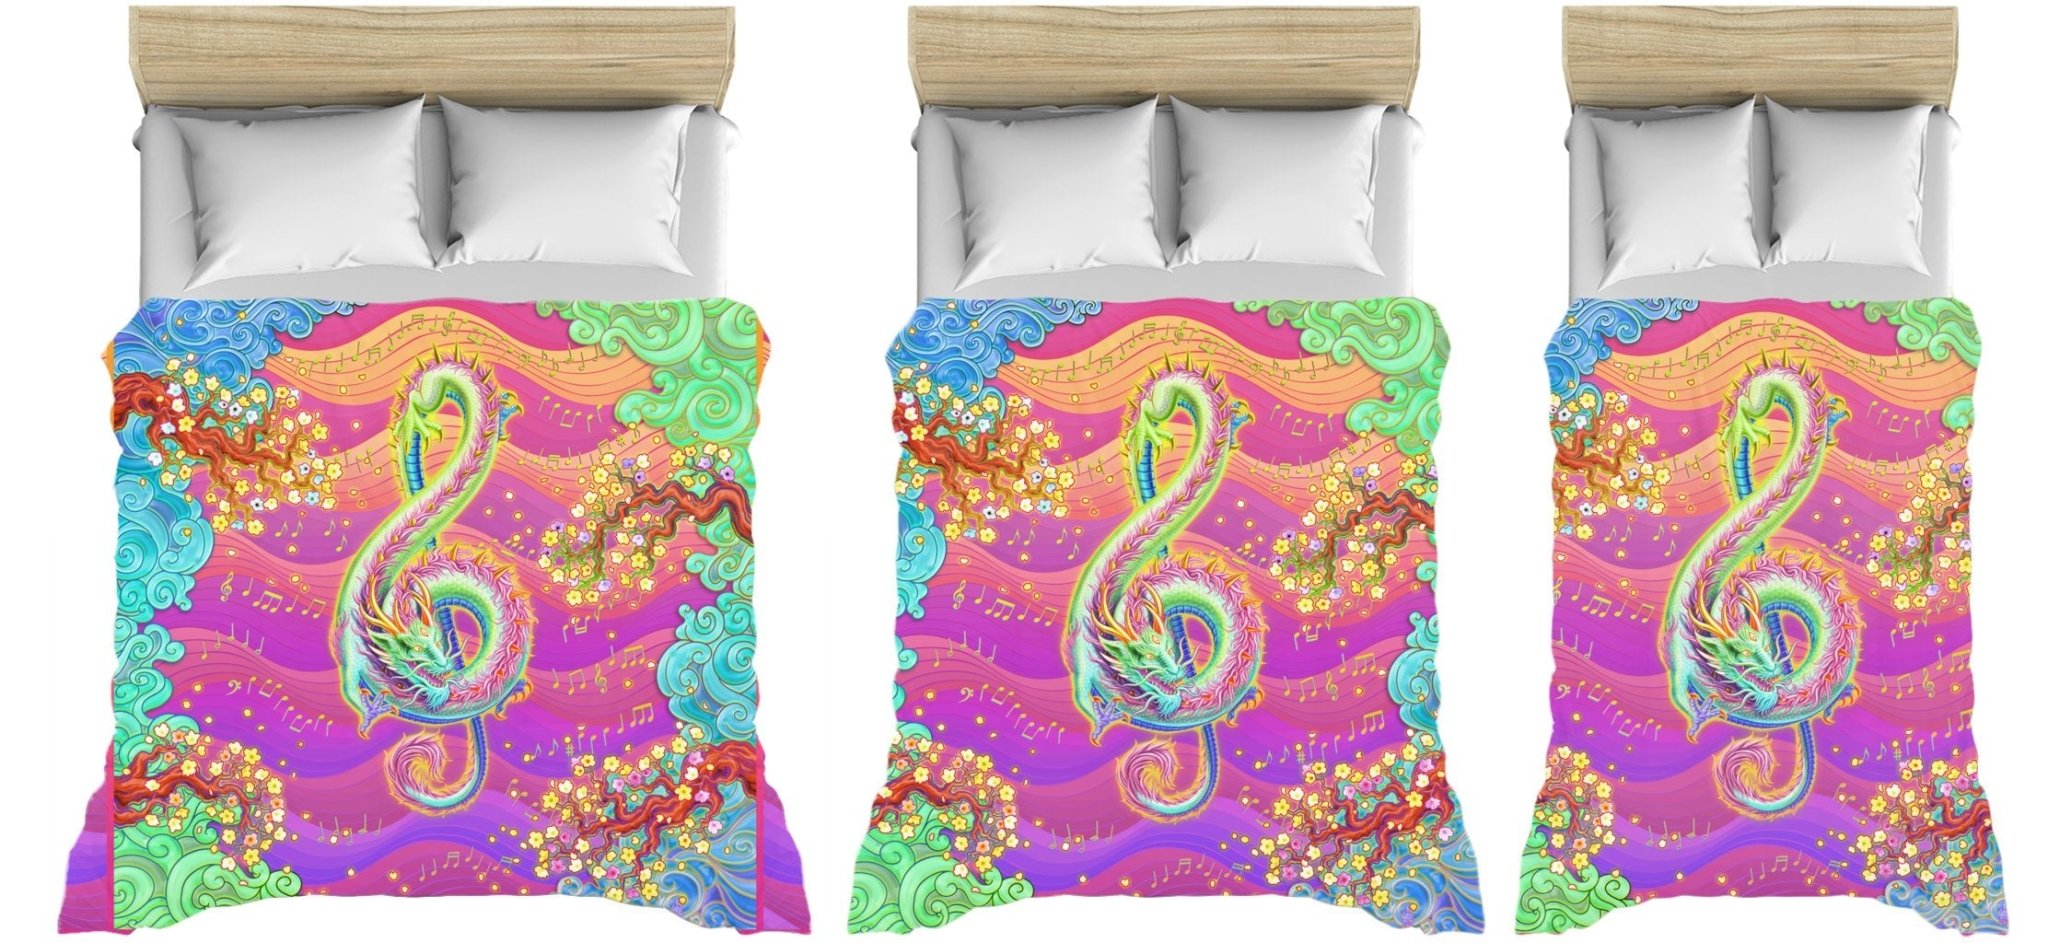 Psychedelic Bedding Set, Comforter and Duvet, Indie Bed Cover and Bedroom Decor, King, Queen and Twin Size - Neon Dragon, Kidcore - Abysm Internal